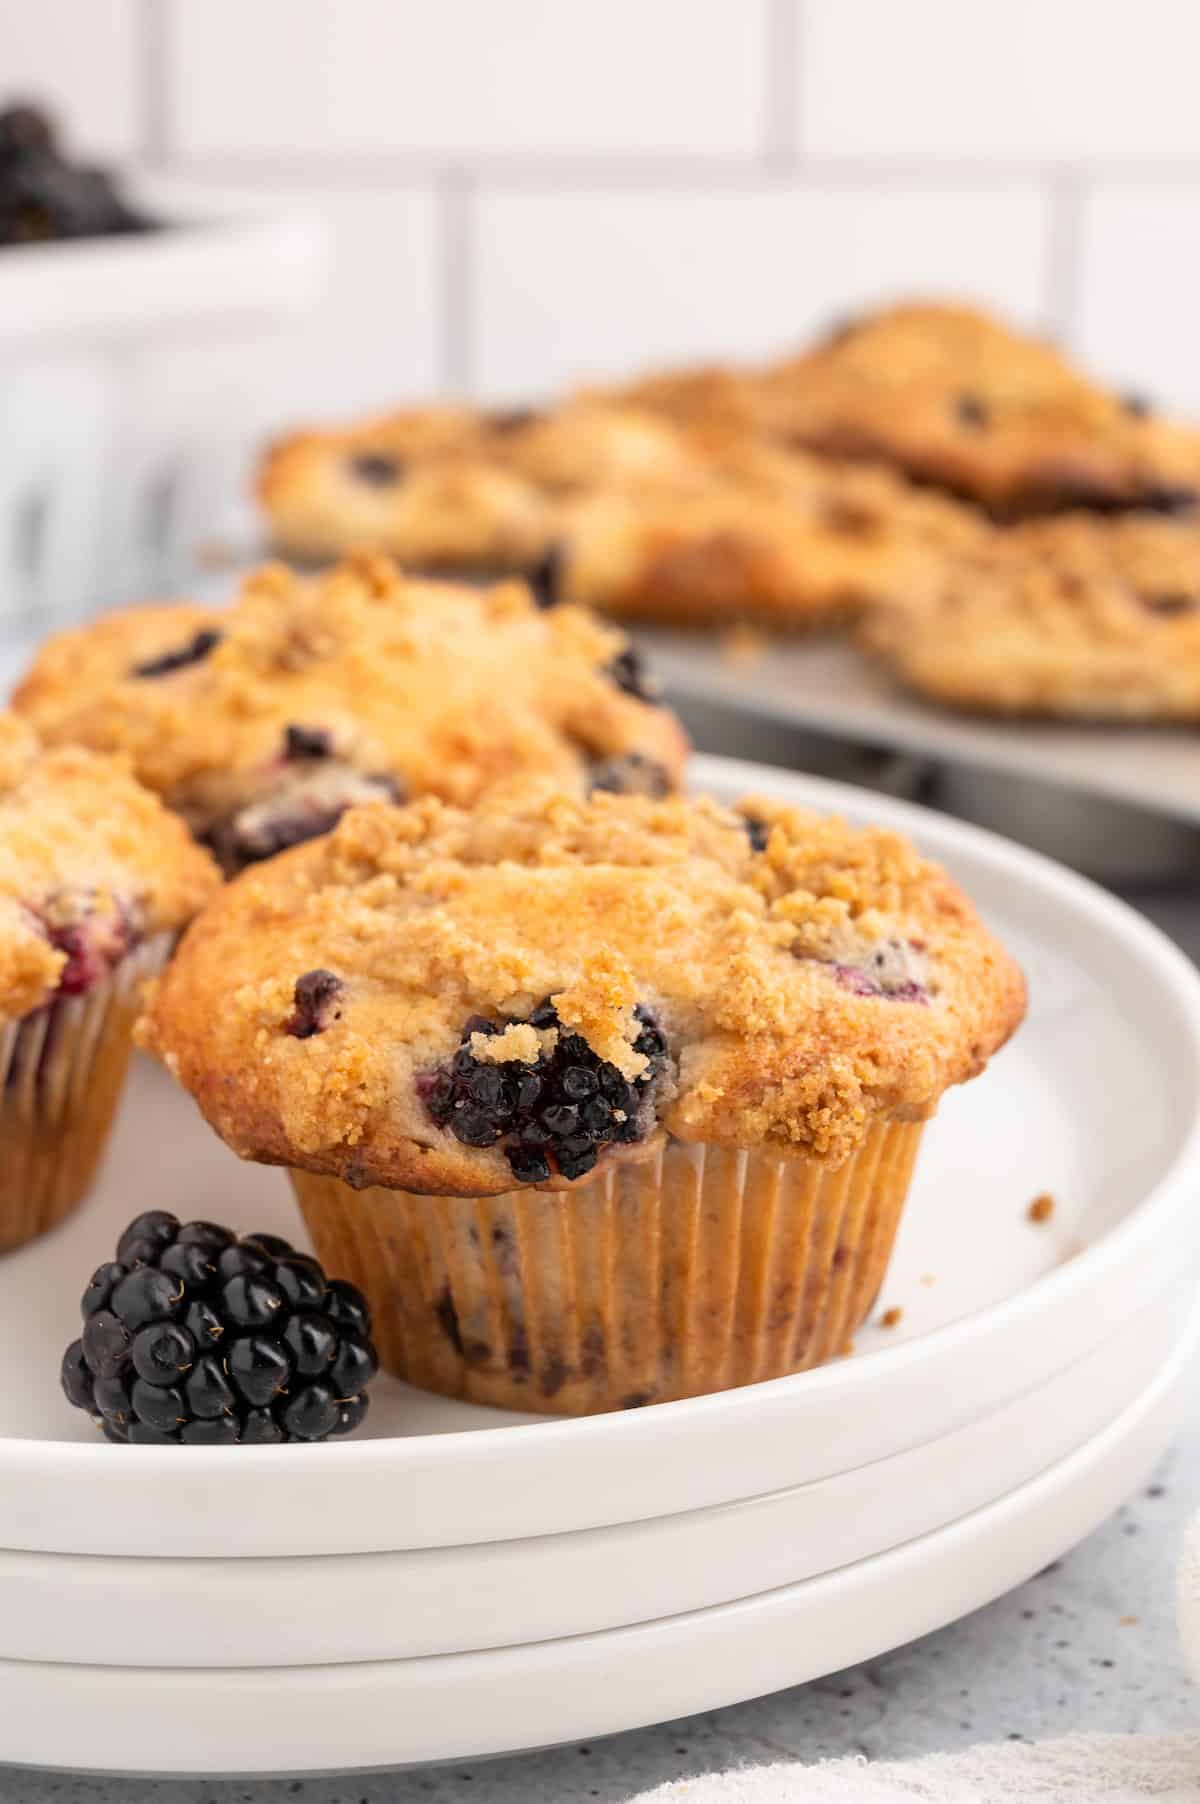 A vegan blackberry muffin on a plate.